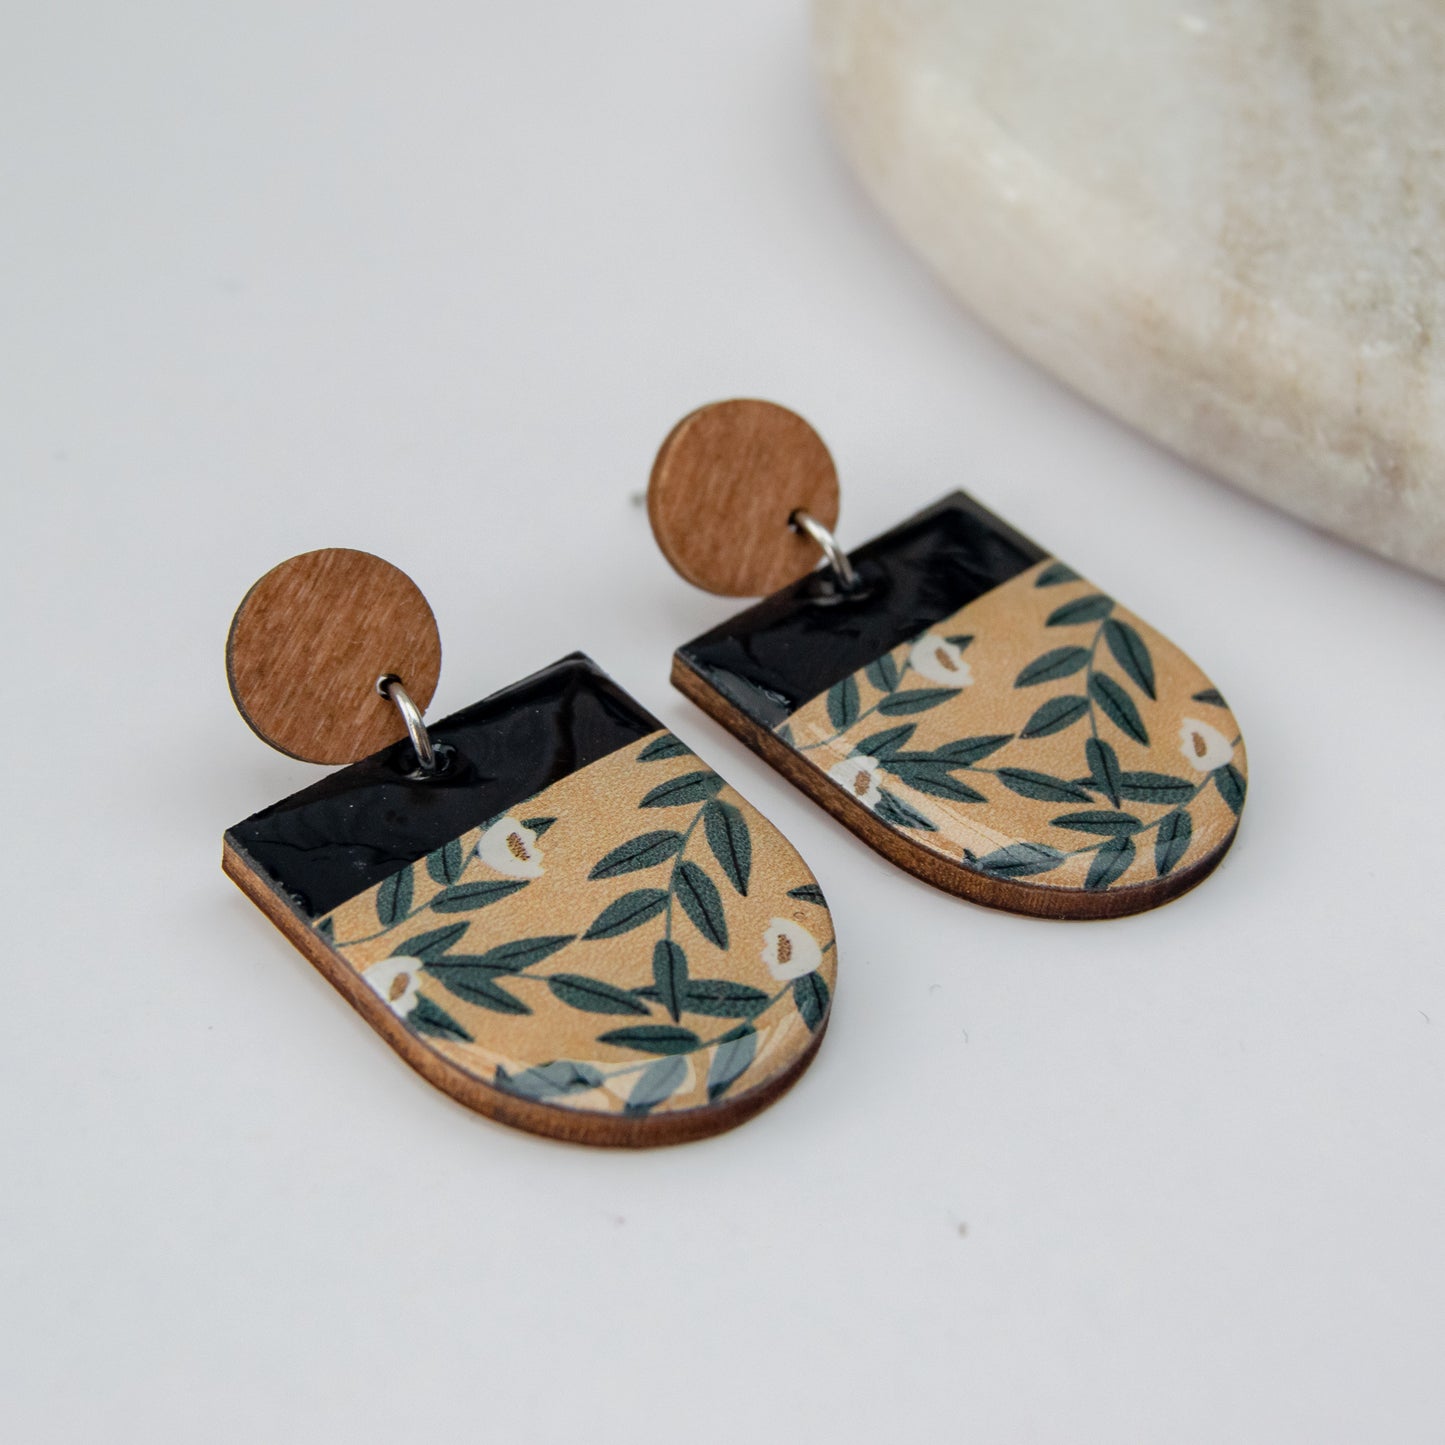 Lize - Wooden statement earrings in natural colors with green leaves